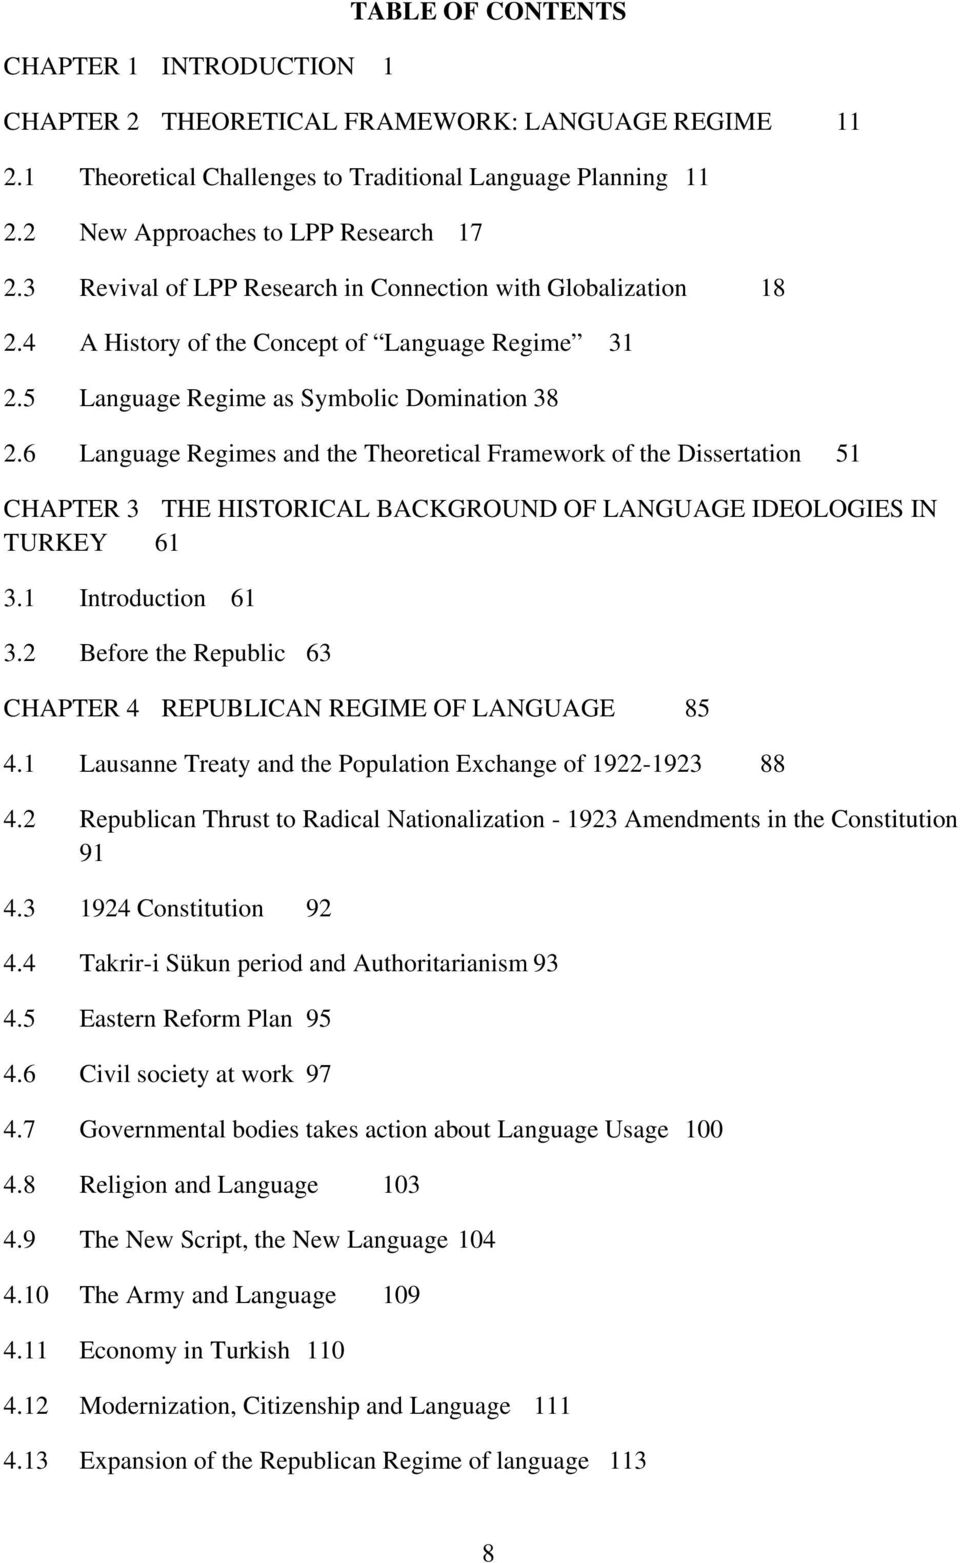 6 Language Regimes and the Theoretical Framework of the Dissertation 51 CHAPTER 3 THE HISTORICAL BACKGROUND OF LANGUAGE IDEOLOGIES IN TURKEY 61 3.1 Introduction 61 3.